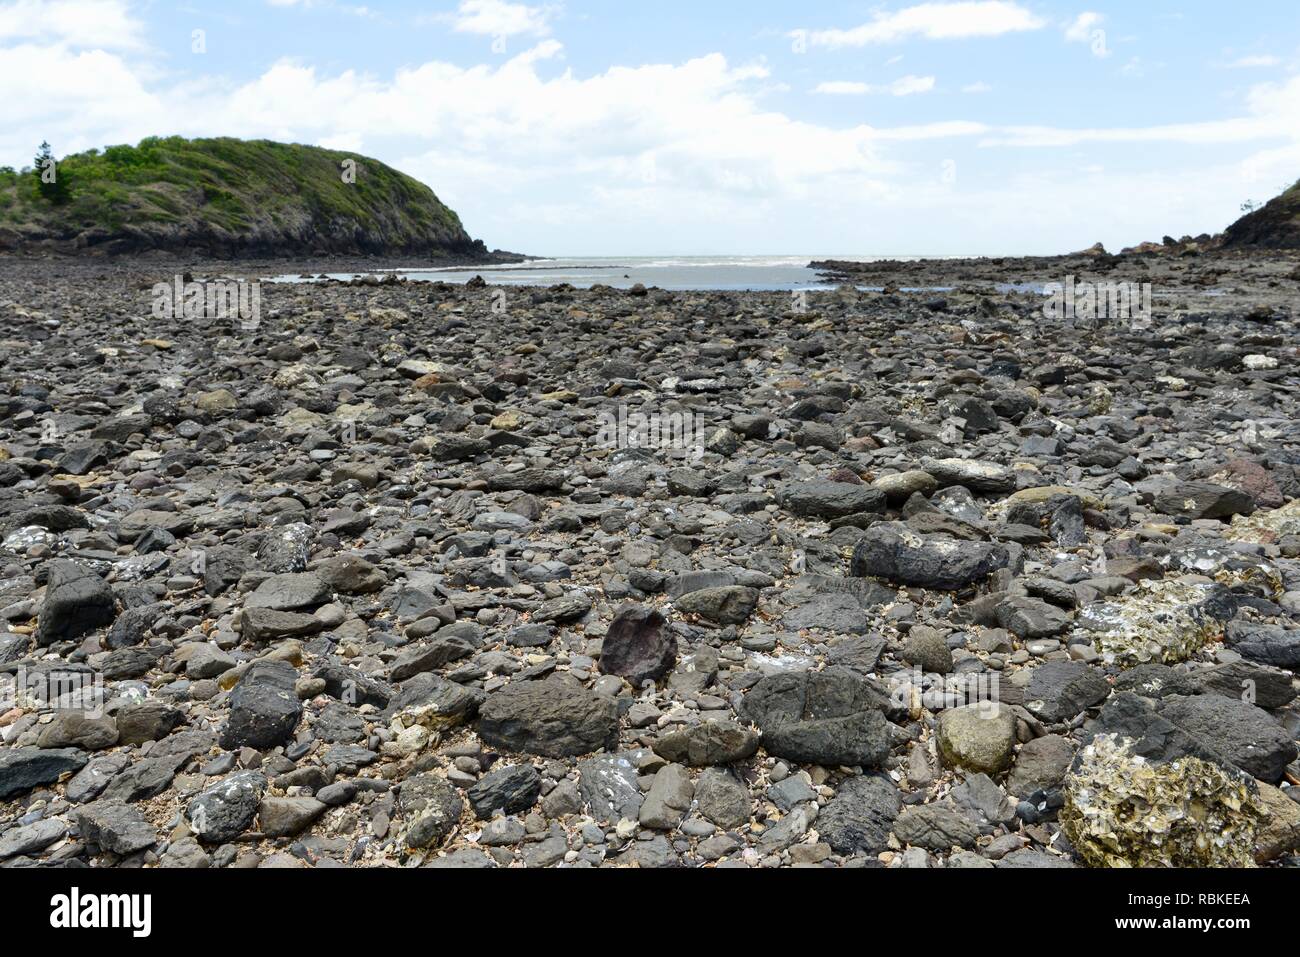 The rocky causeway connecting wedge island to the mainland, Hiking through Cape Hillsborough National Park, Queensland, Australia Stock Photo